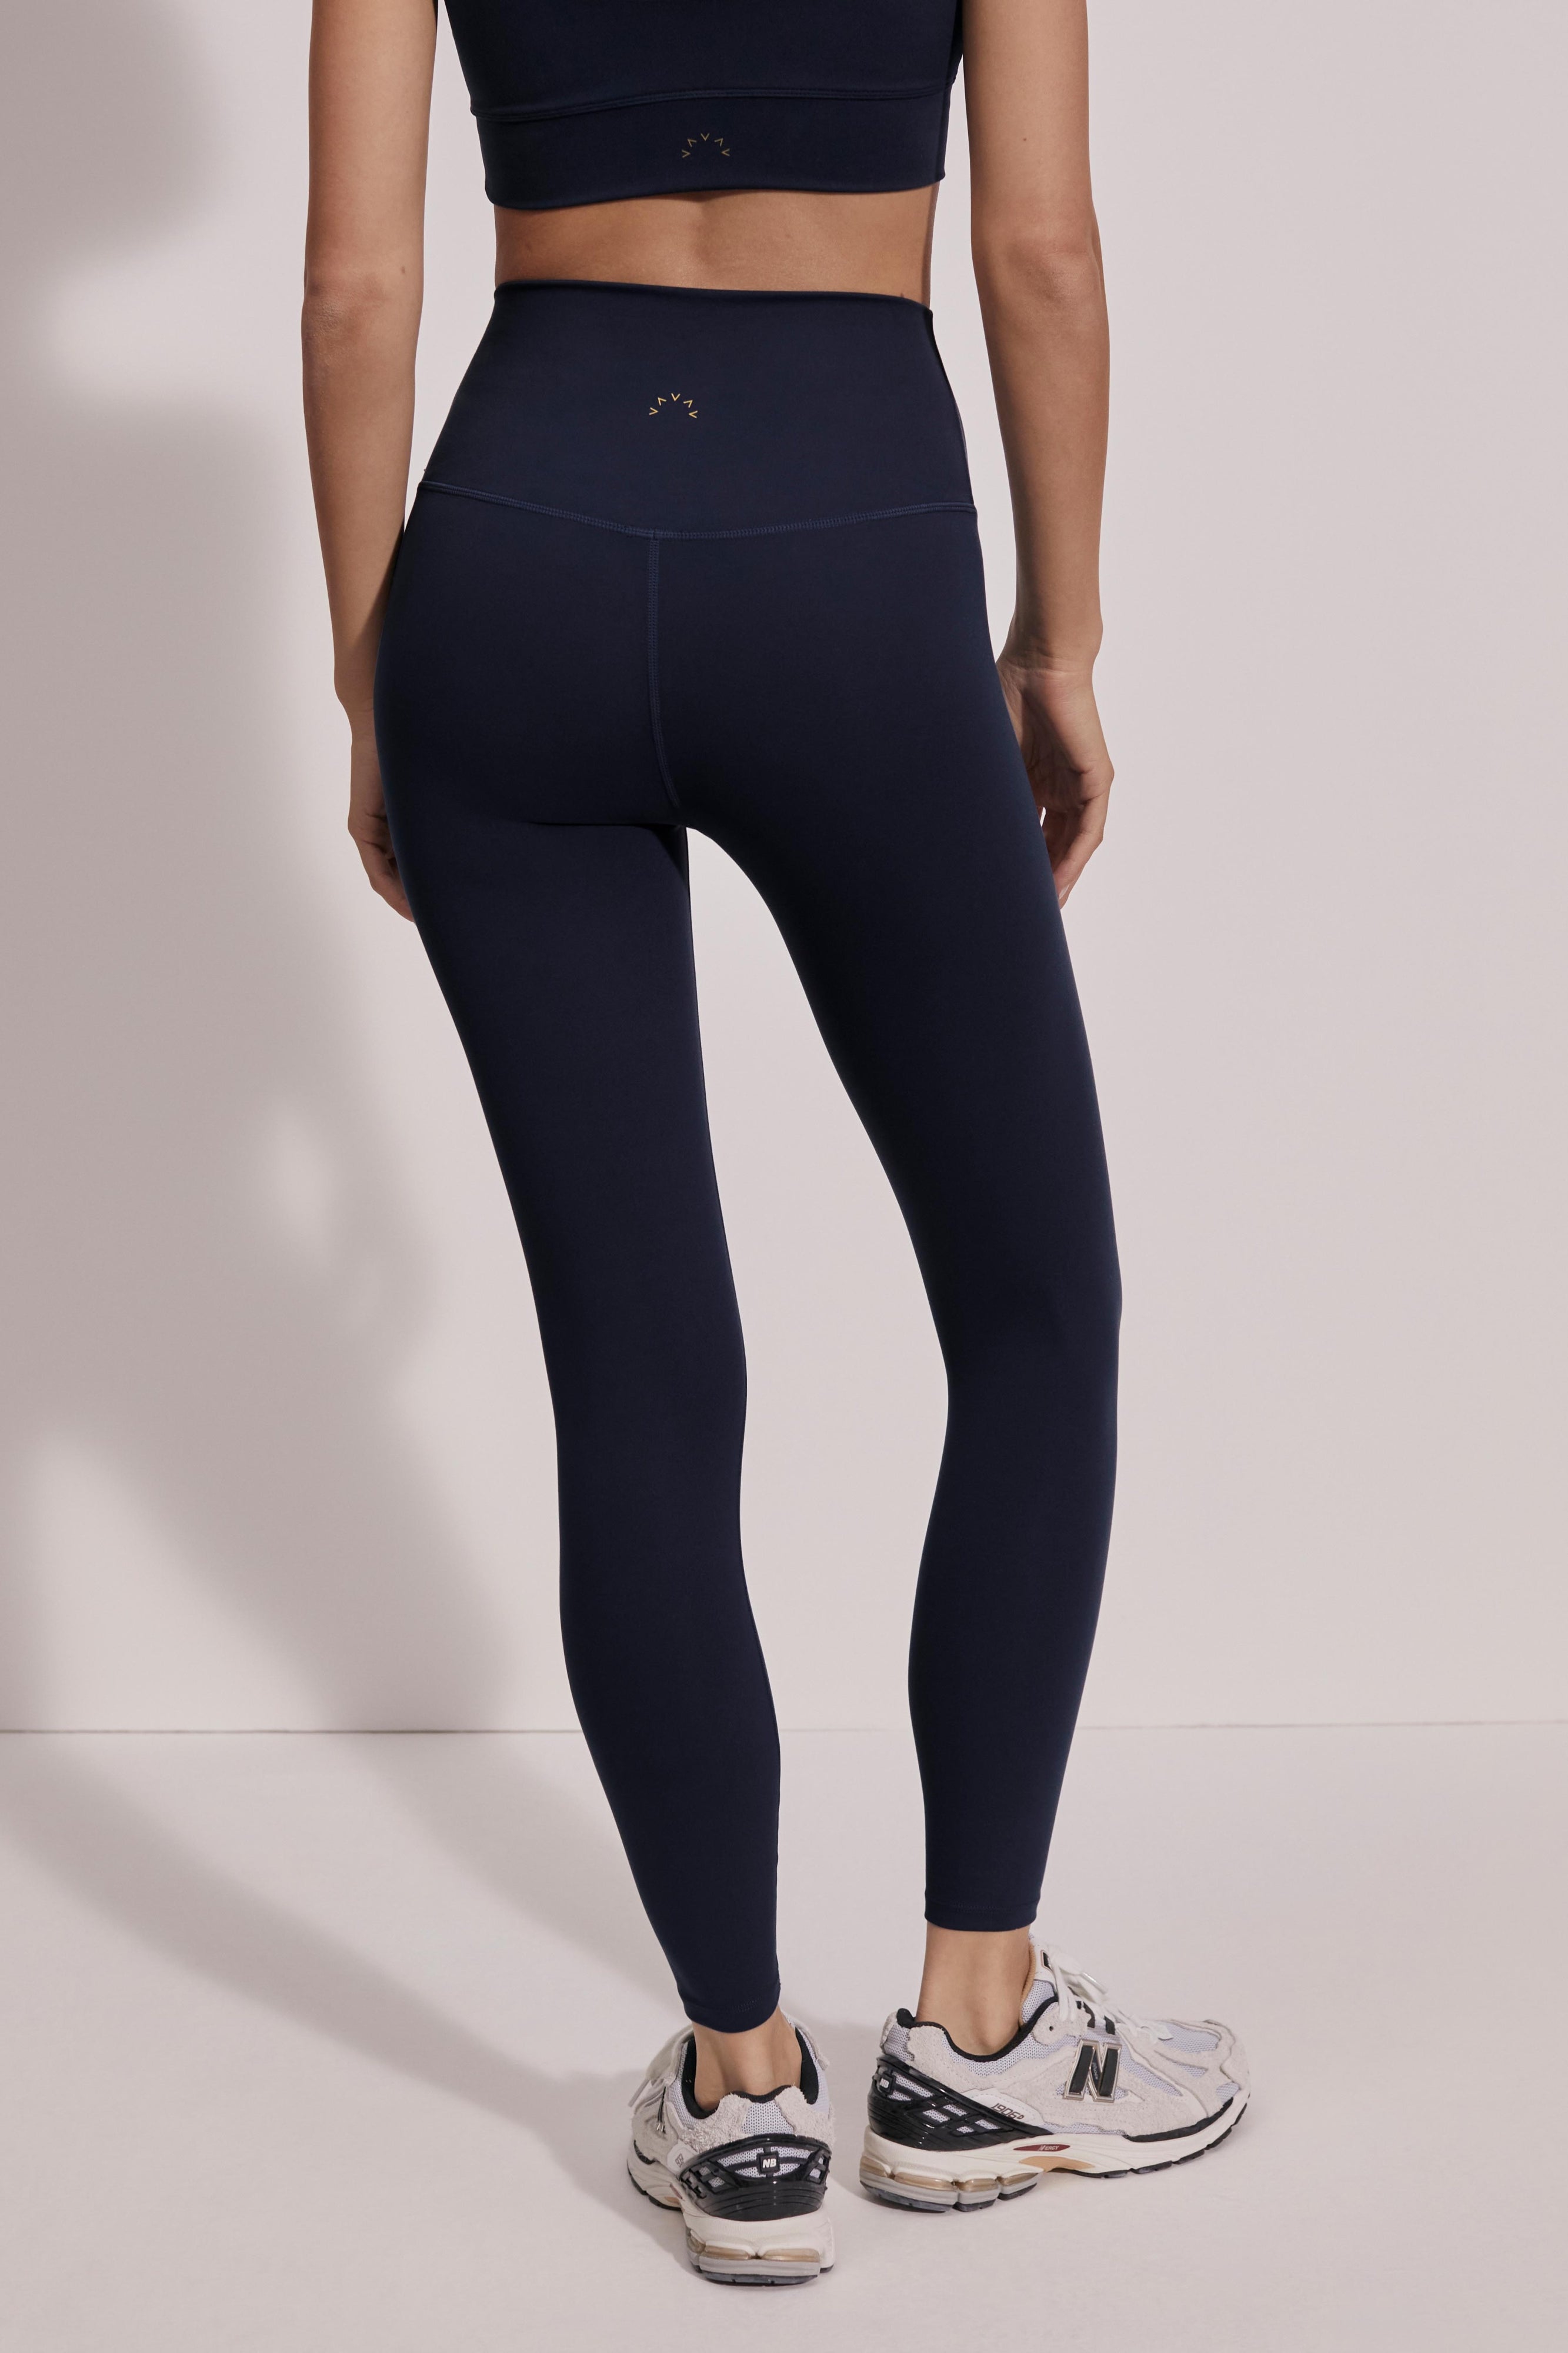 Rush NEW Shefit Boss Leggings in Crown pattern NWT Size M - $50 New With  Tags - From BLuxe